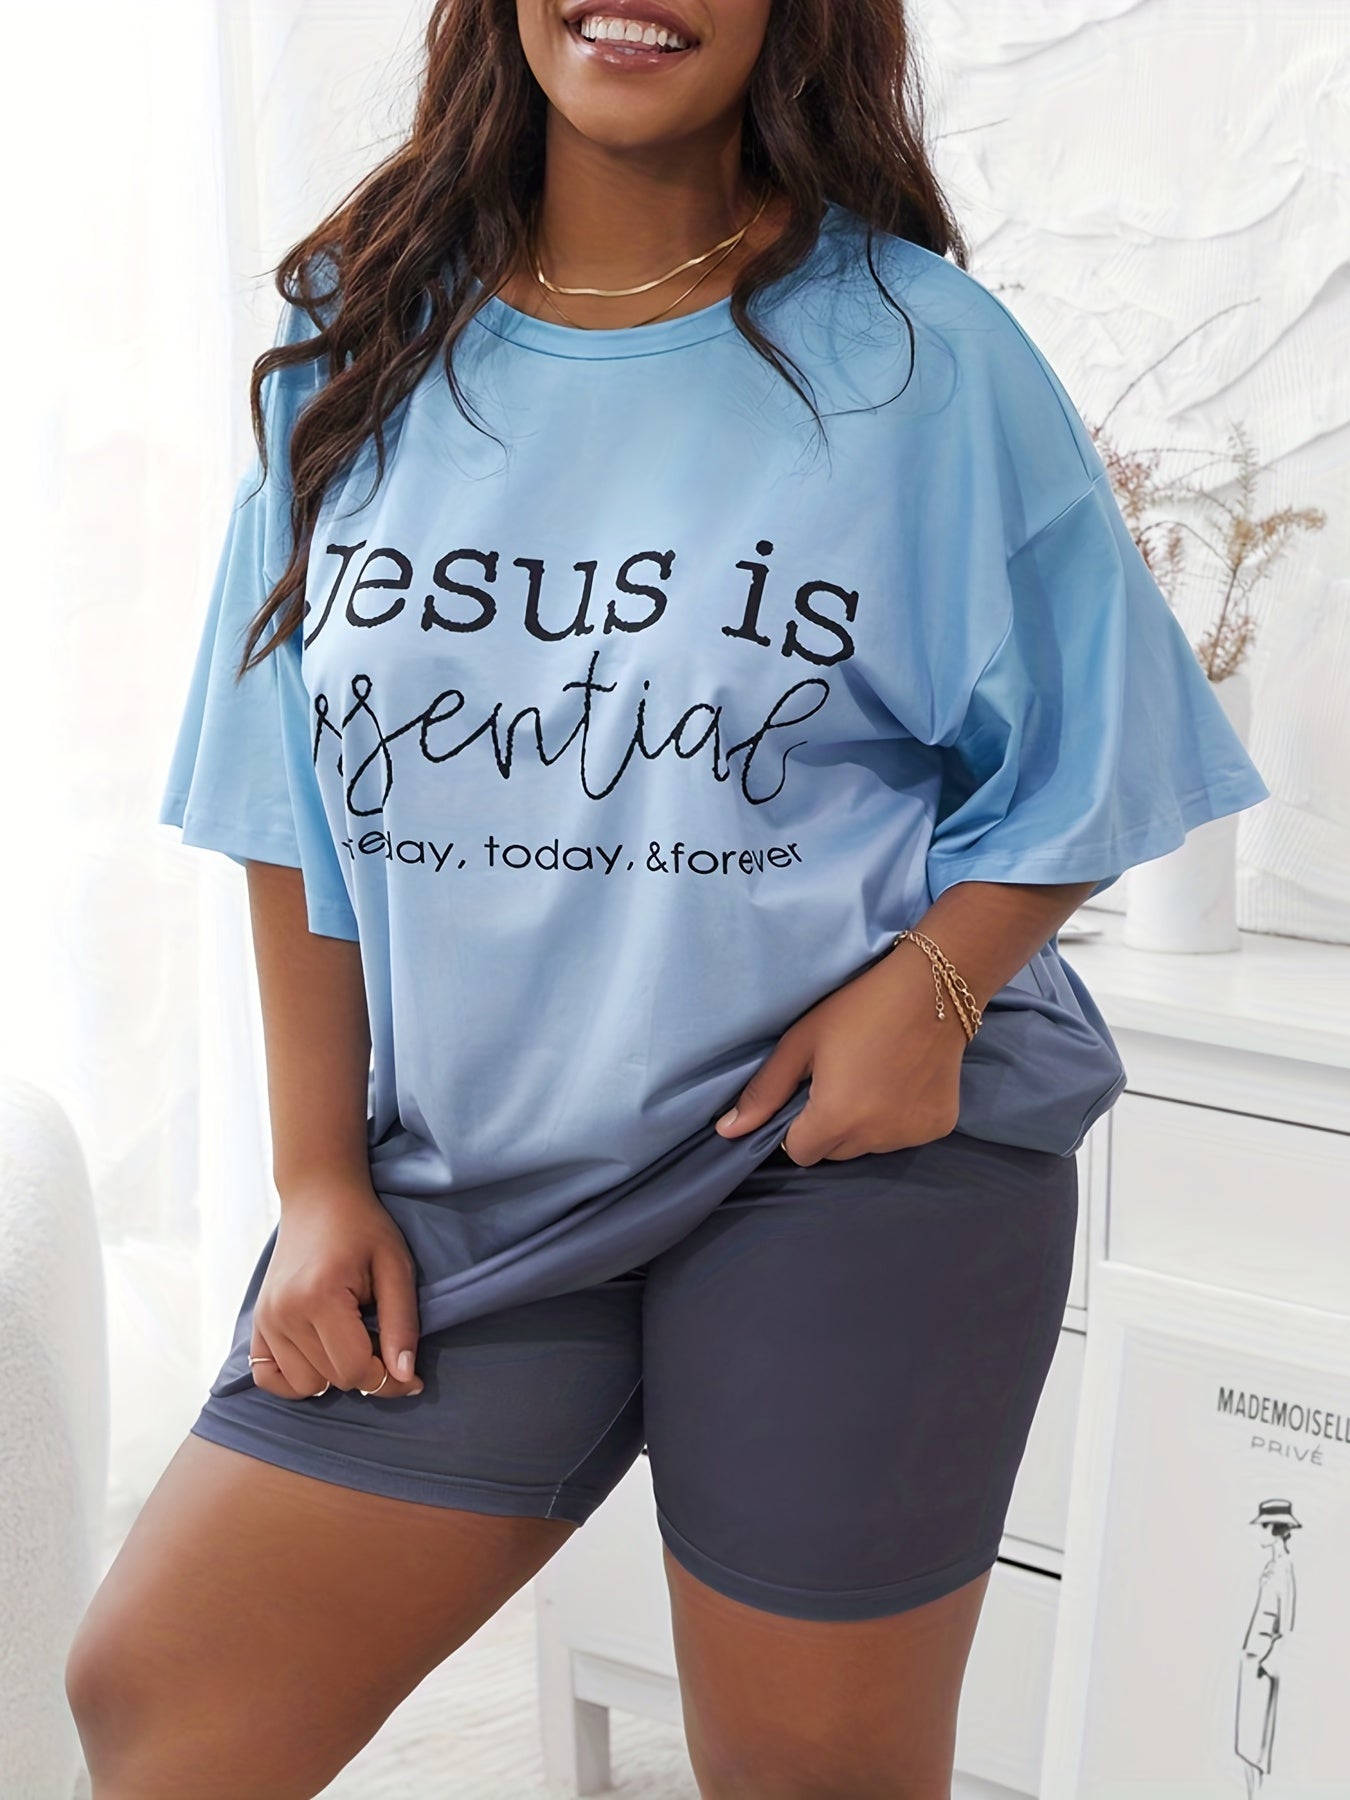 Jesus Is Essential Yesterday Today And Forever Plus Size Women's Christian Pajamas claimedbygoddesigns